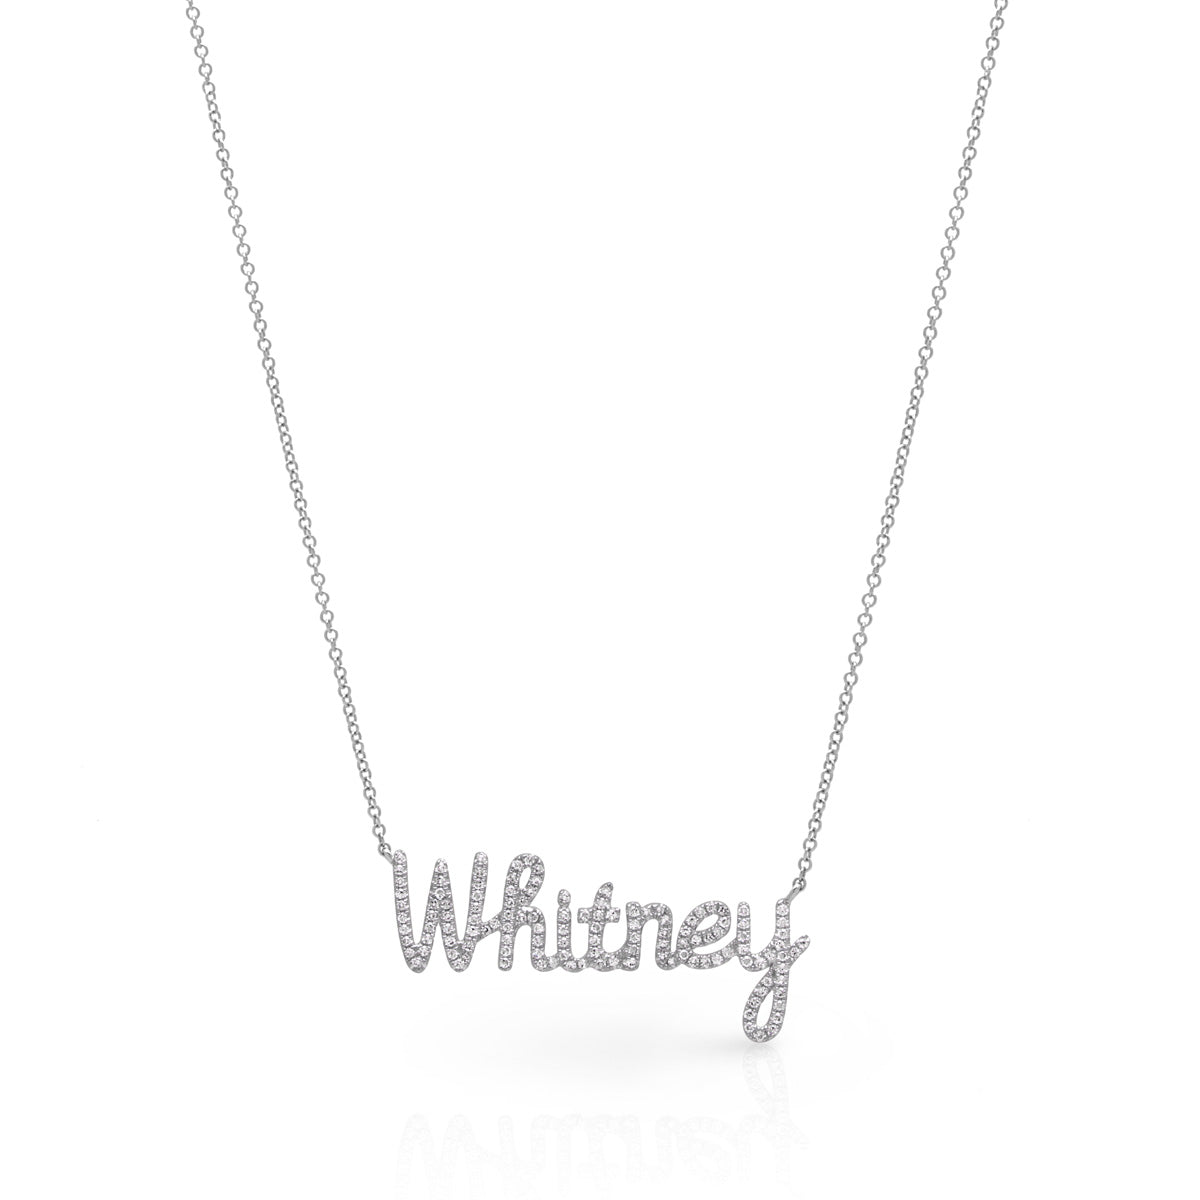 14KT White Gold Diamond Personalized Name Necklace